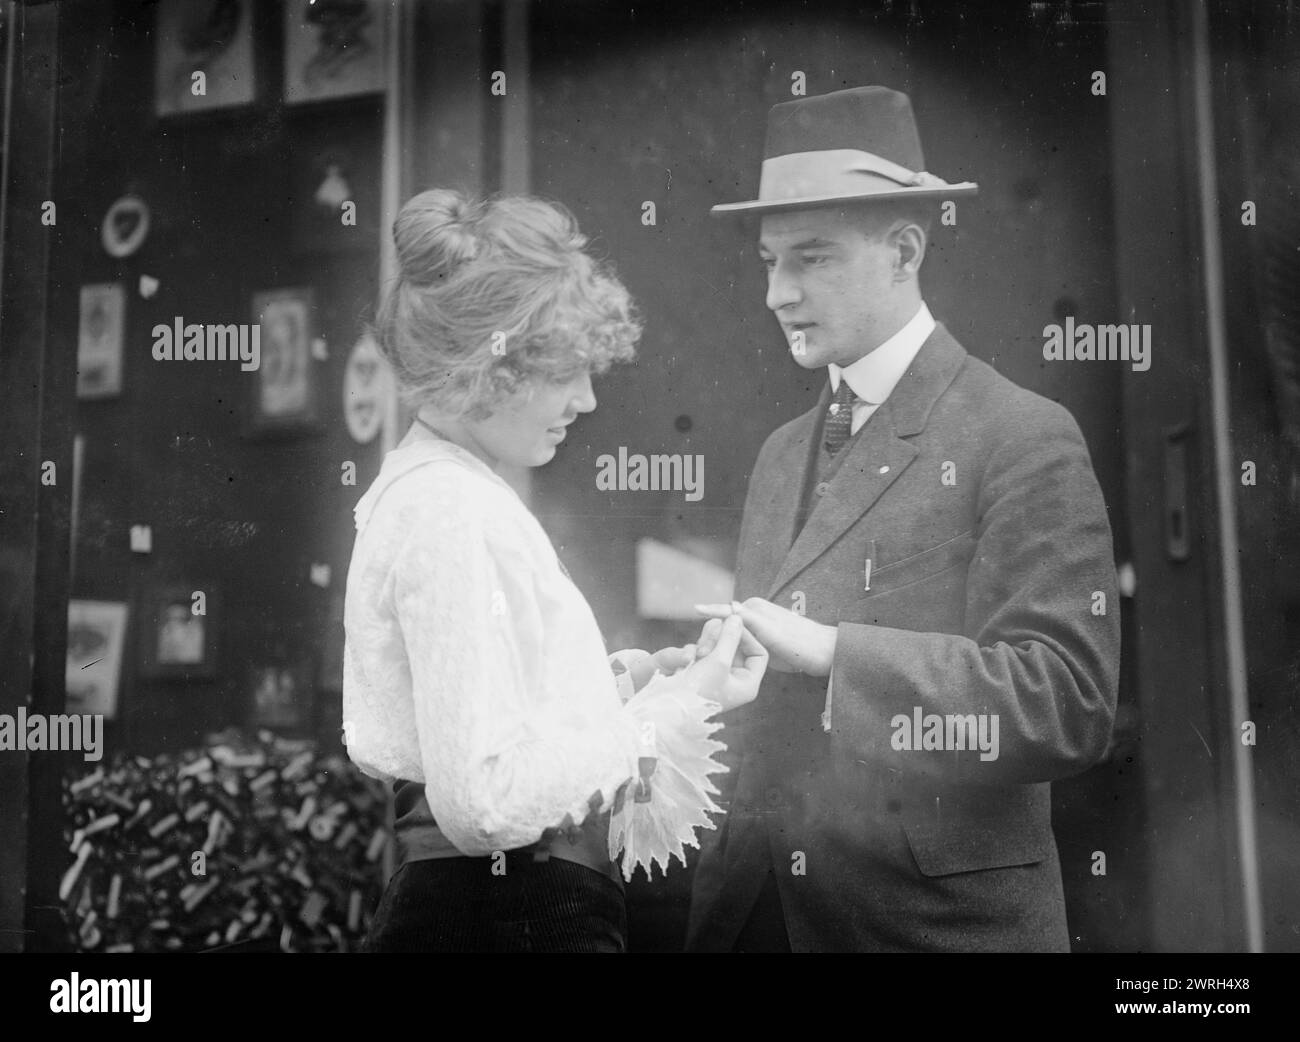 Henrietta Mielke giving iron ring to contributor, 22 Oct 1914 (date created or published later). Henrietta Mielke (b. 1897) giving a ring to a man. Her father, Henry Mielke was a store owner and member of the &quot;Gold for Iron&quot; (Gold fur Eisen) organization which gave iron rings to people in exchange for gold and jewels which were used to support the German war effort during World War I. Photograph probably taken outside? Mielke's store located on Second Avenue at the corner of 87th Street in New York City. Stock Photo